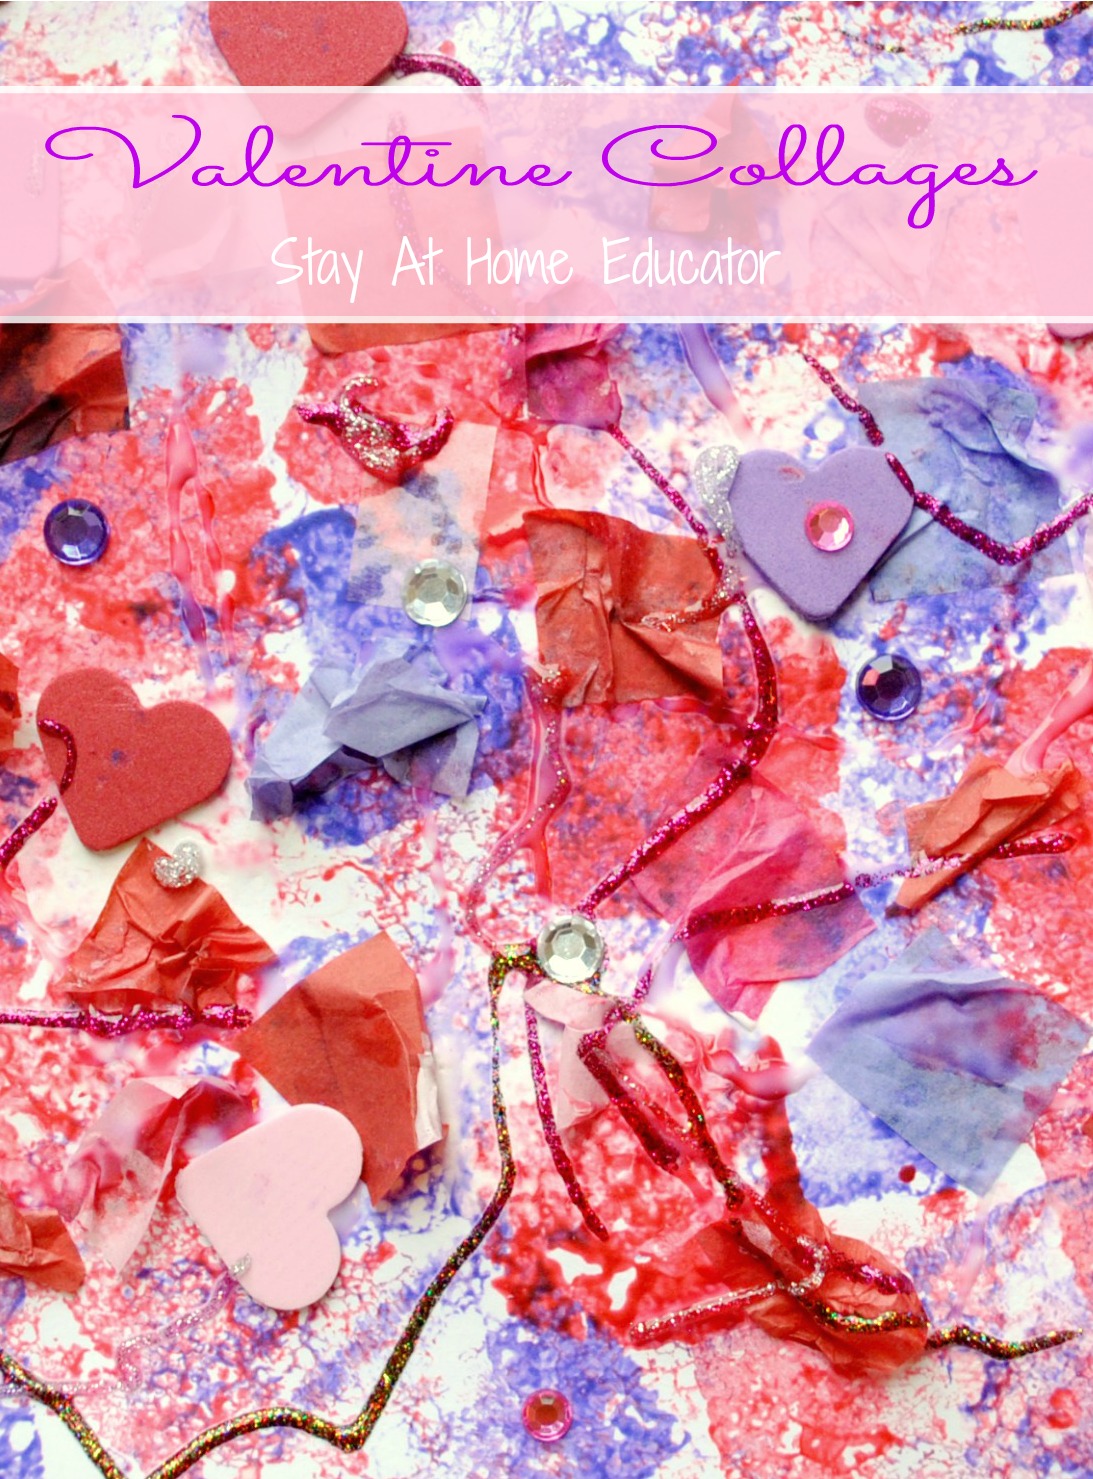 Valentine Collages - Stay At Home Educator